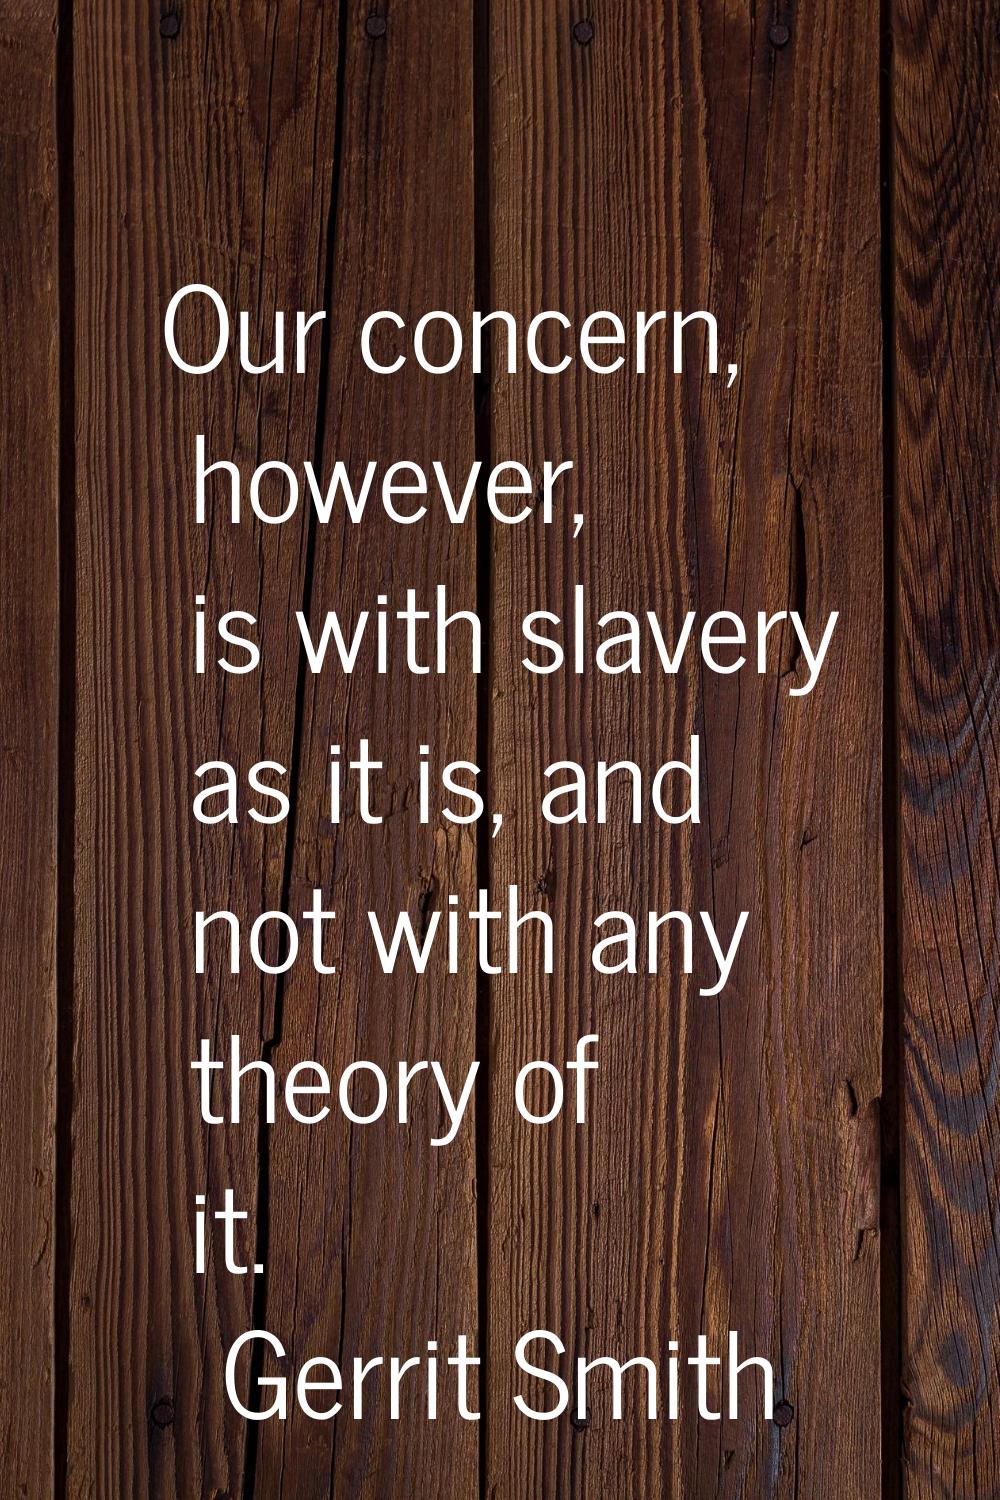 Our concern, however, is with slavery as it is, and not with any theory of it.